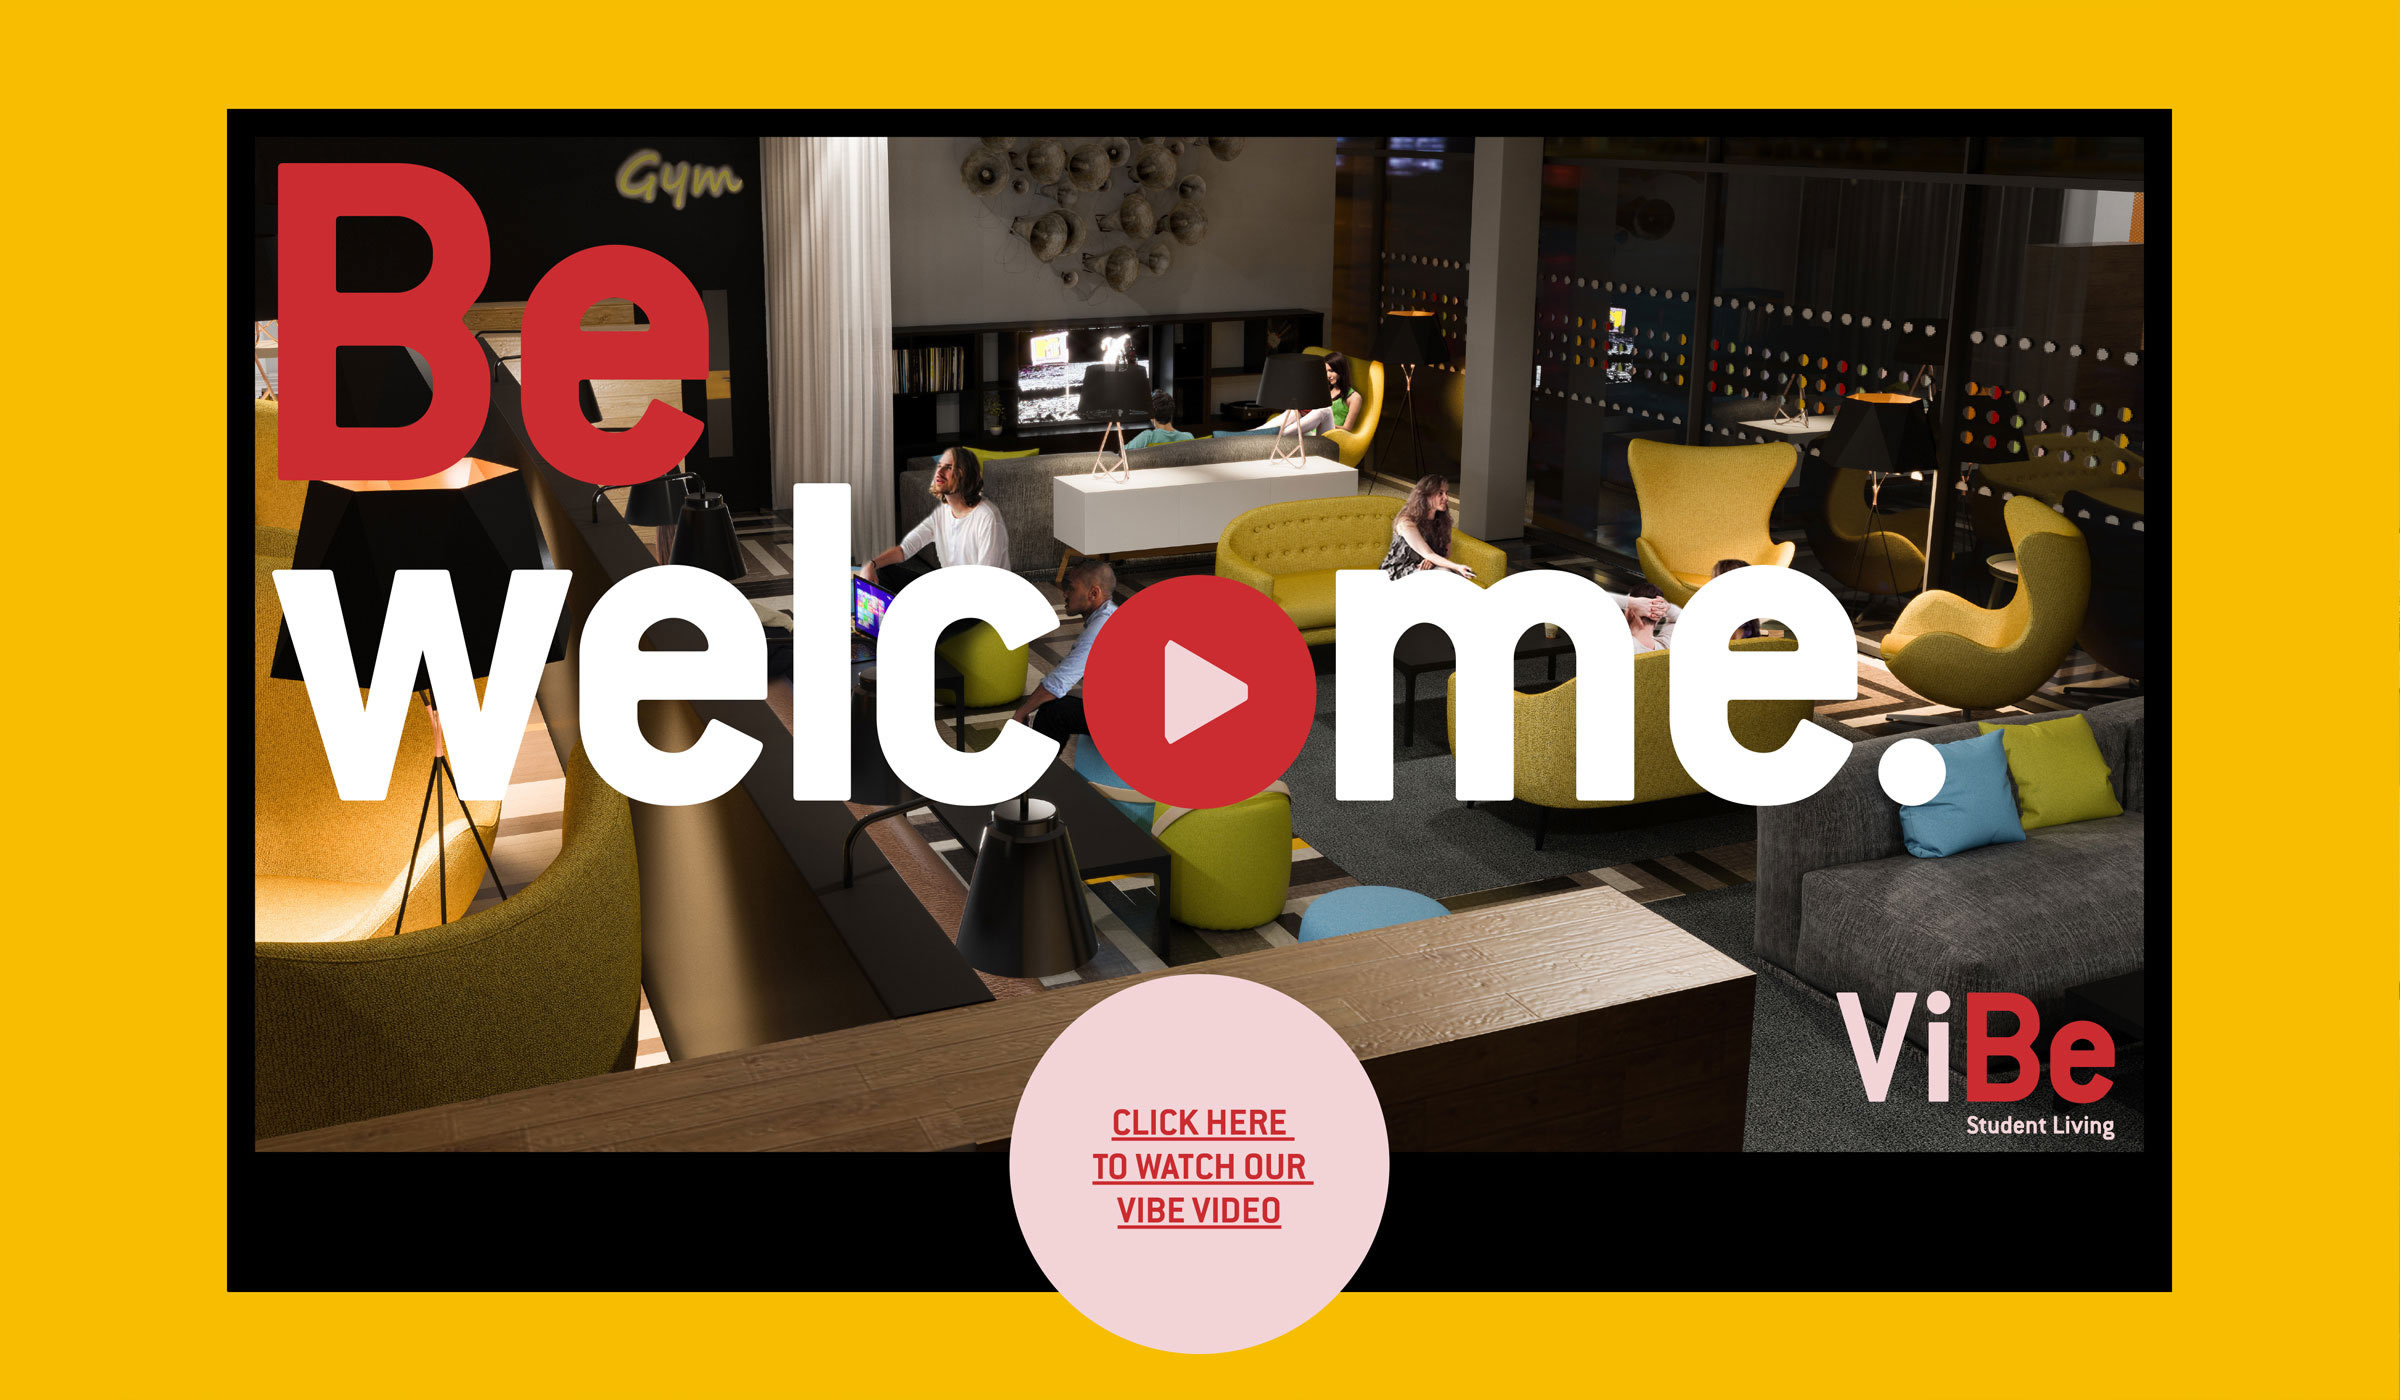 Opening September 2017 Vibe Student Living - click here to watch our video